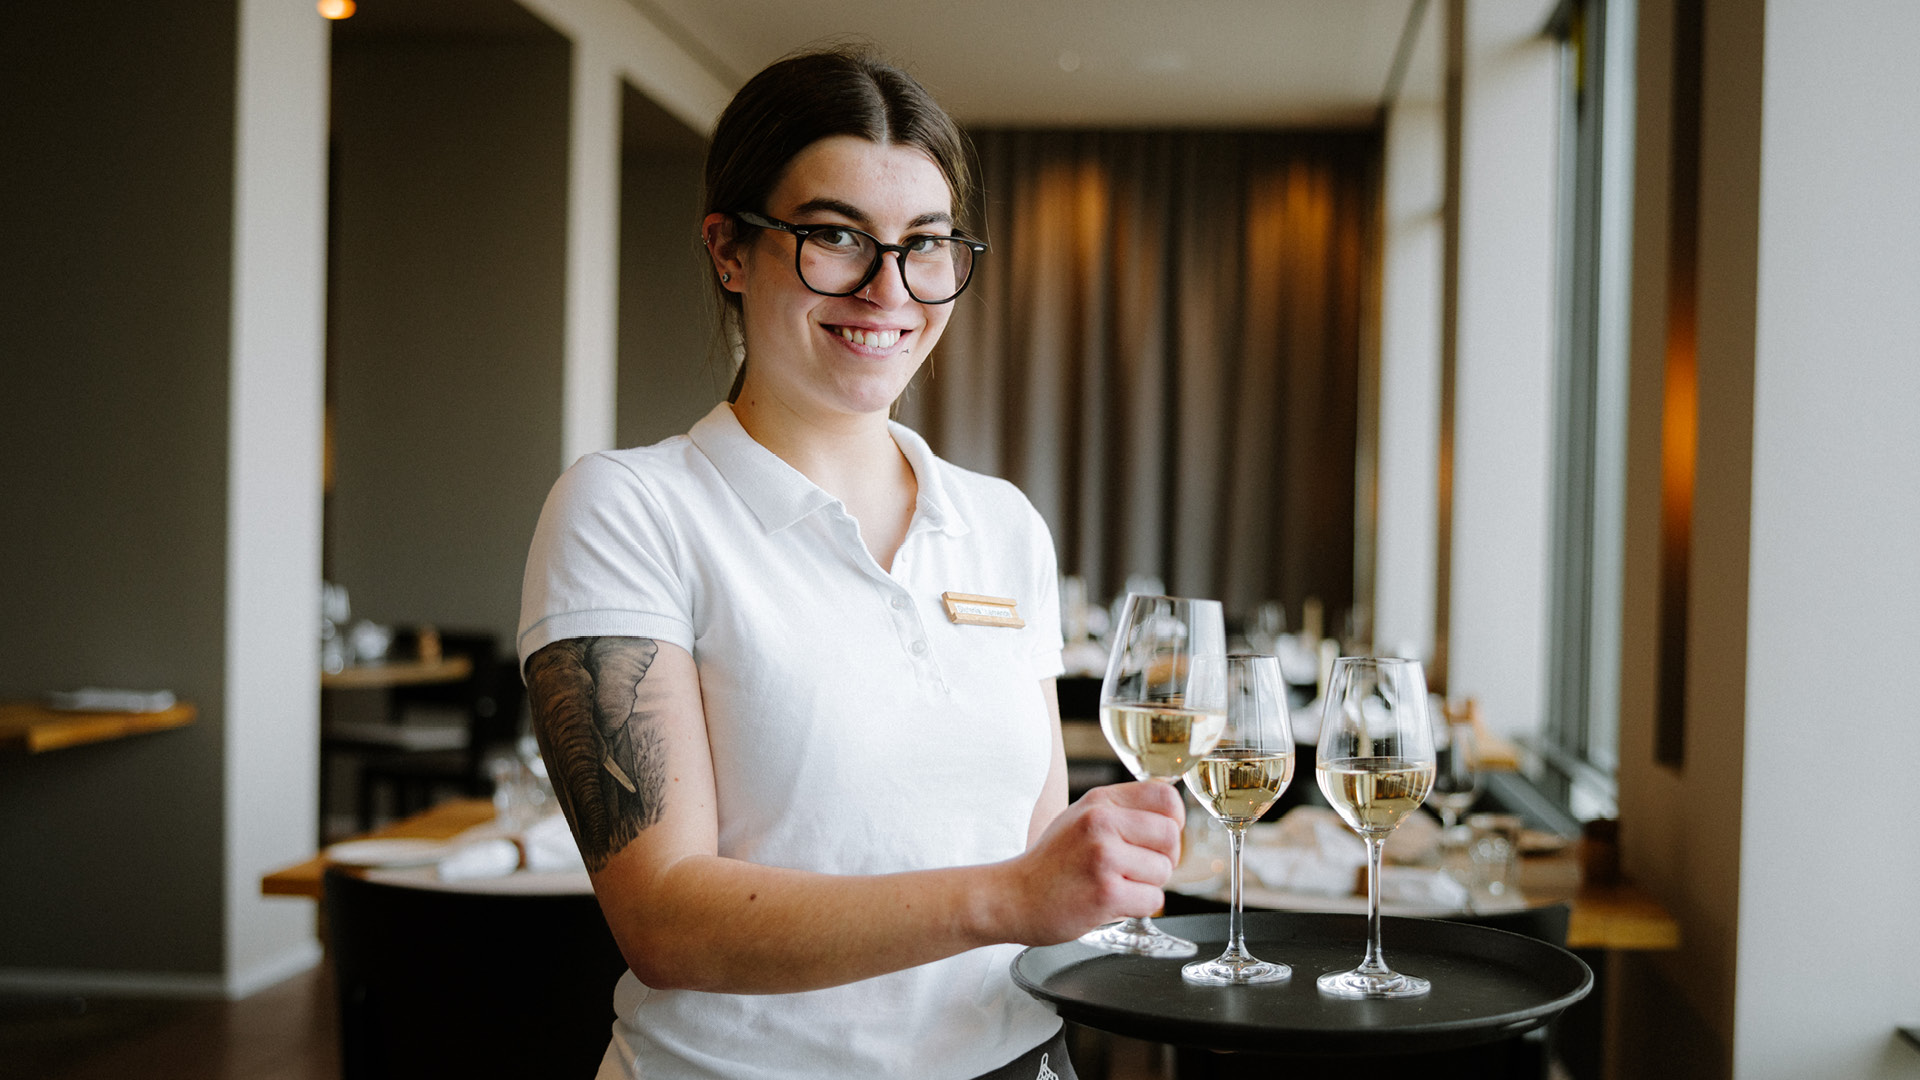 Service employee carries a plateau with wine glasses in Gurtners restaurant